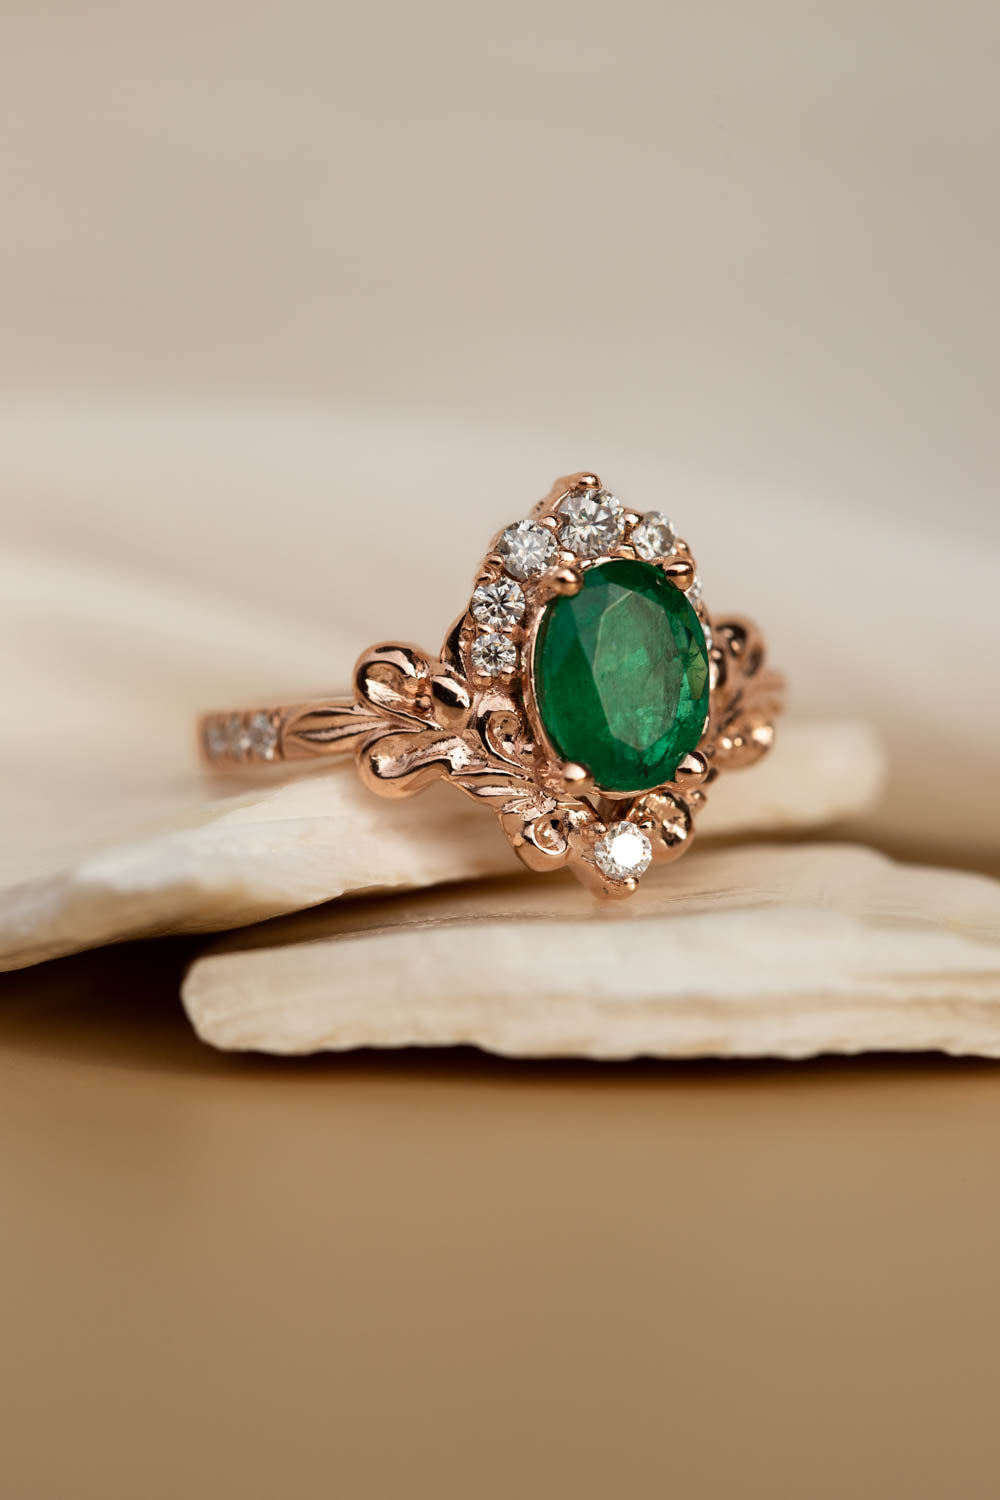 Rose gold engagement ring with emerald, crown shape gold ring with diamonds / Sophie - Eden Garden Jewelry™